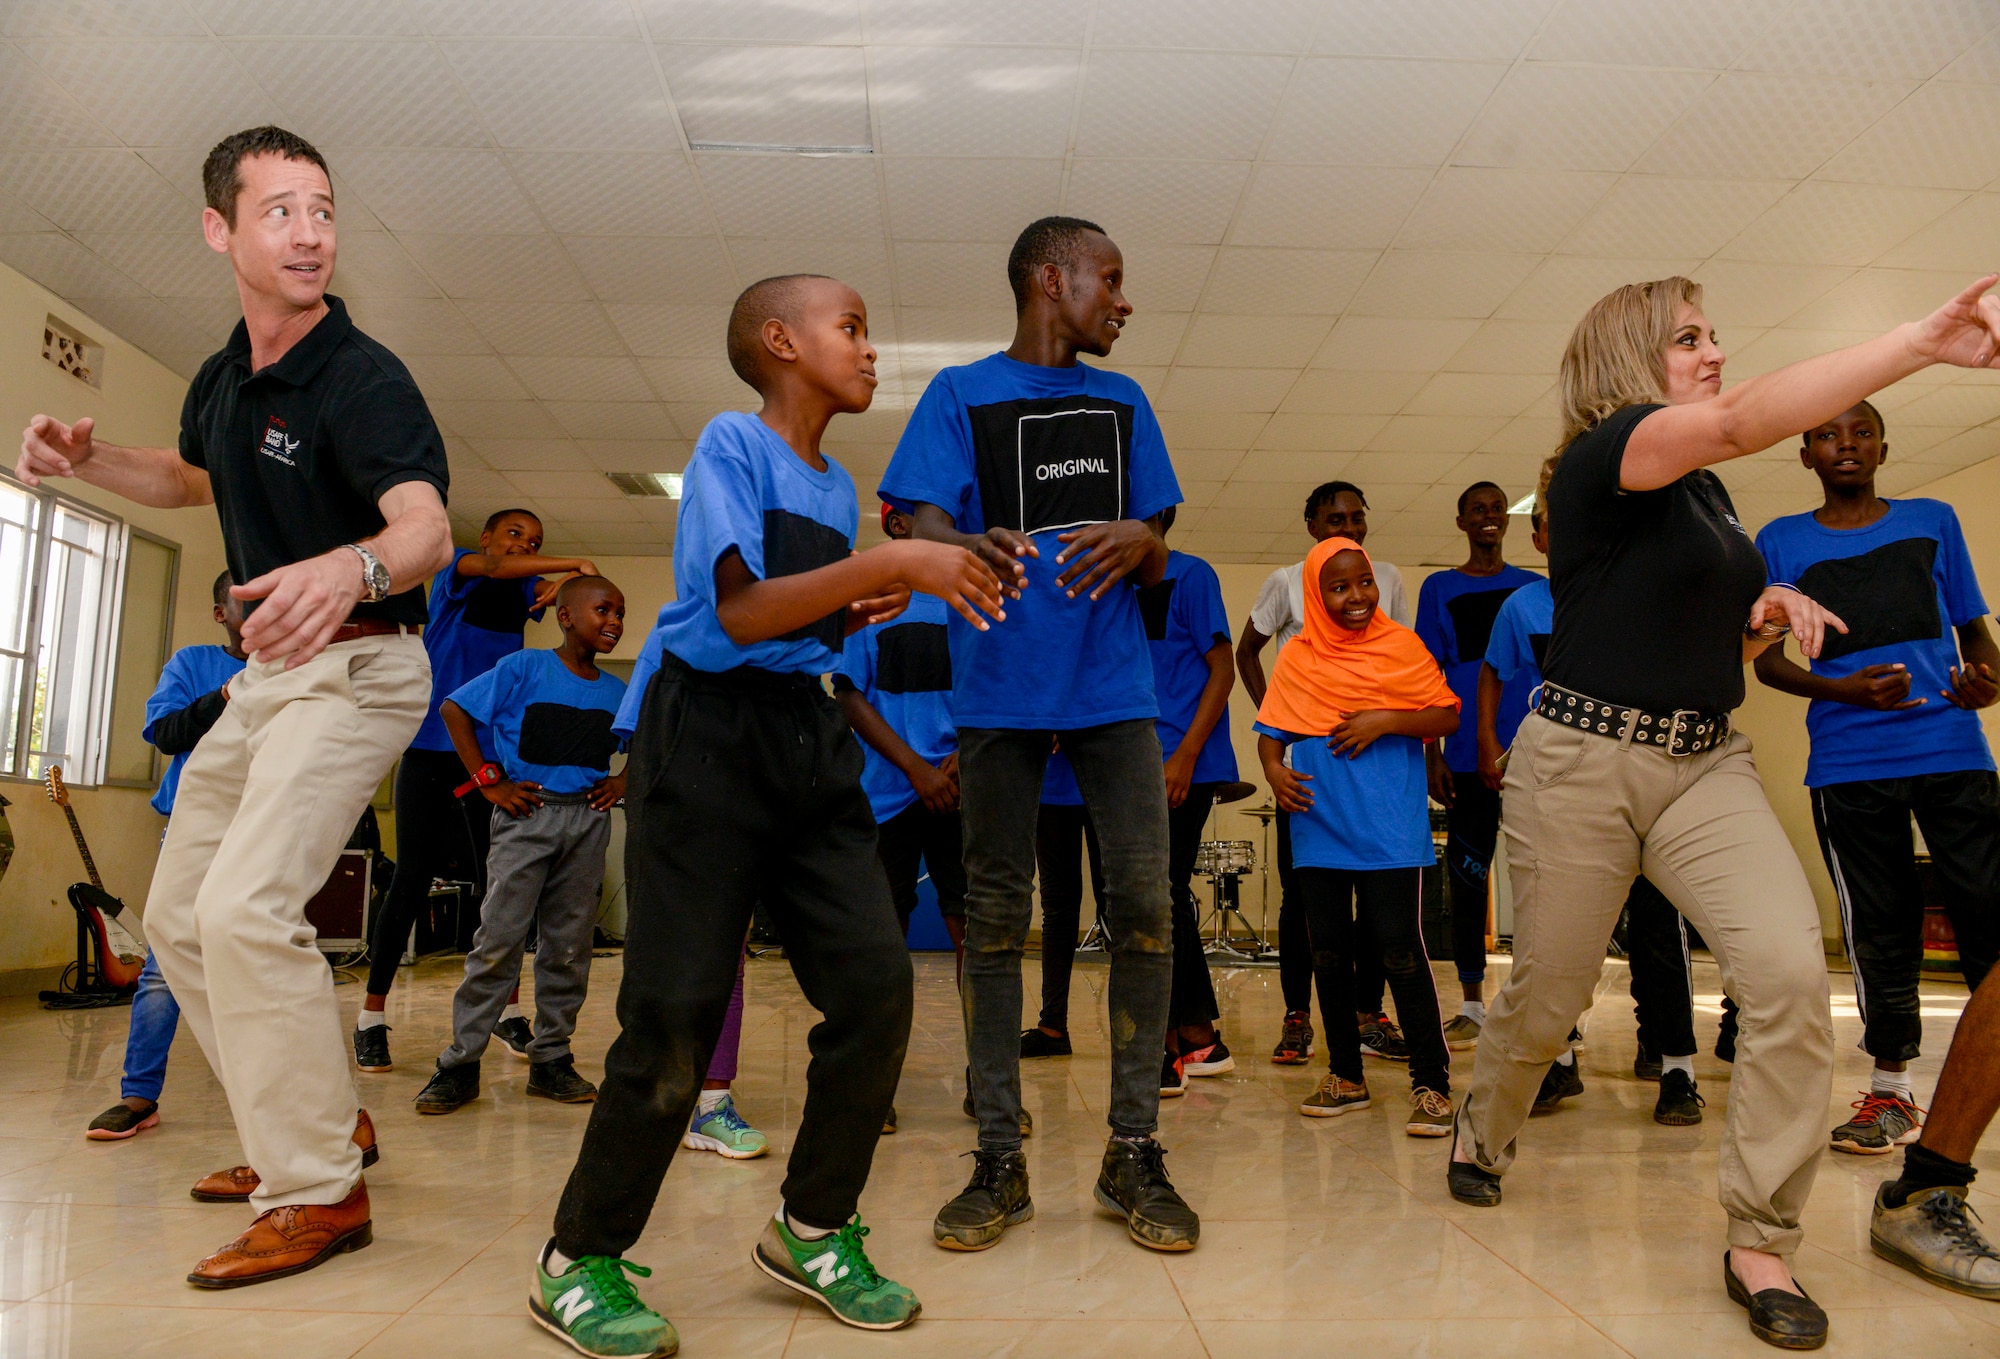 U.S. Airmen assigned to the U.S. Air Forces in Europe Band Touch N' Go dance along with students at the Gisimba Memorial Centre in Kigali, Rwanda, March 6, 2019. As musical ambassadors, members of the band can reach audiences that traditional military members can't. They travel the world to build cultural bridges, and honor and preserve cultural heritage. (U.S. Air Force photo by Tech. Sgt. Timothy Moore)